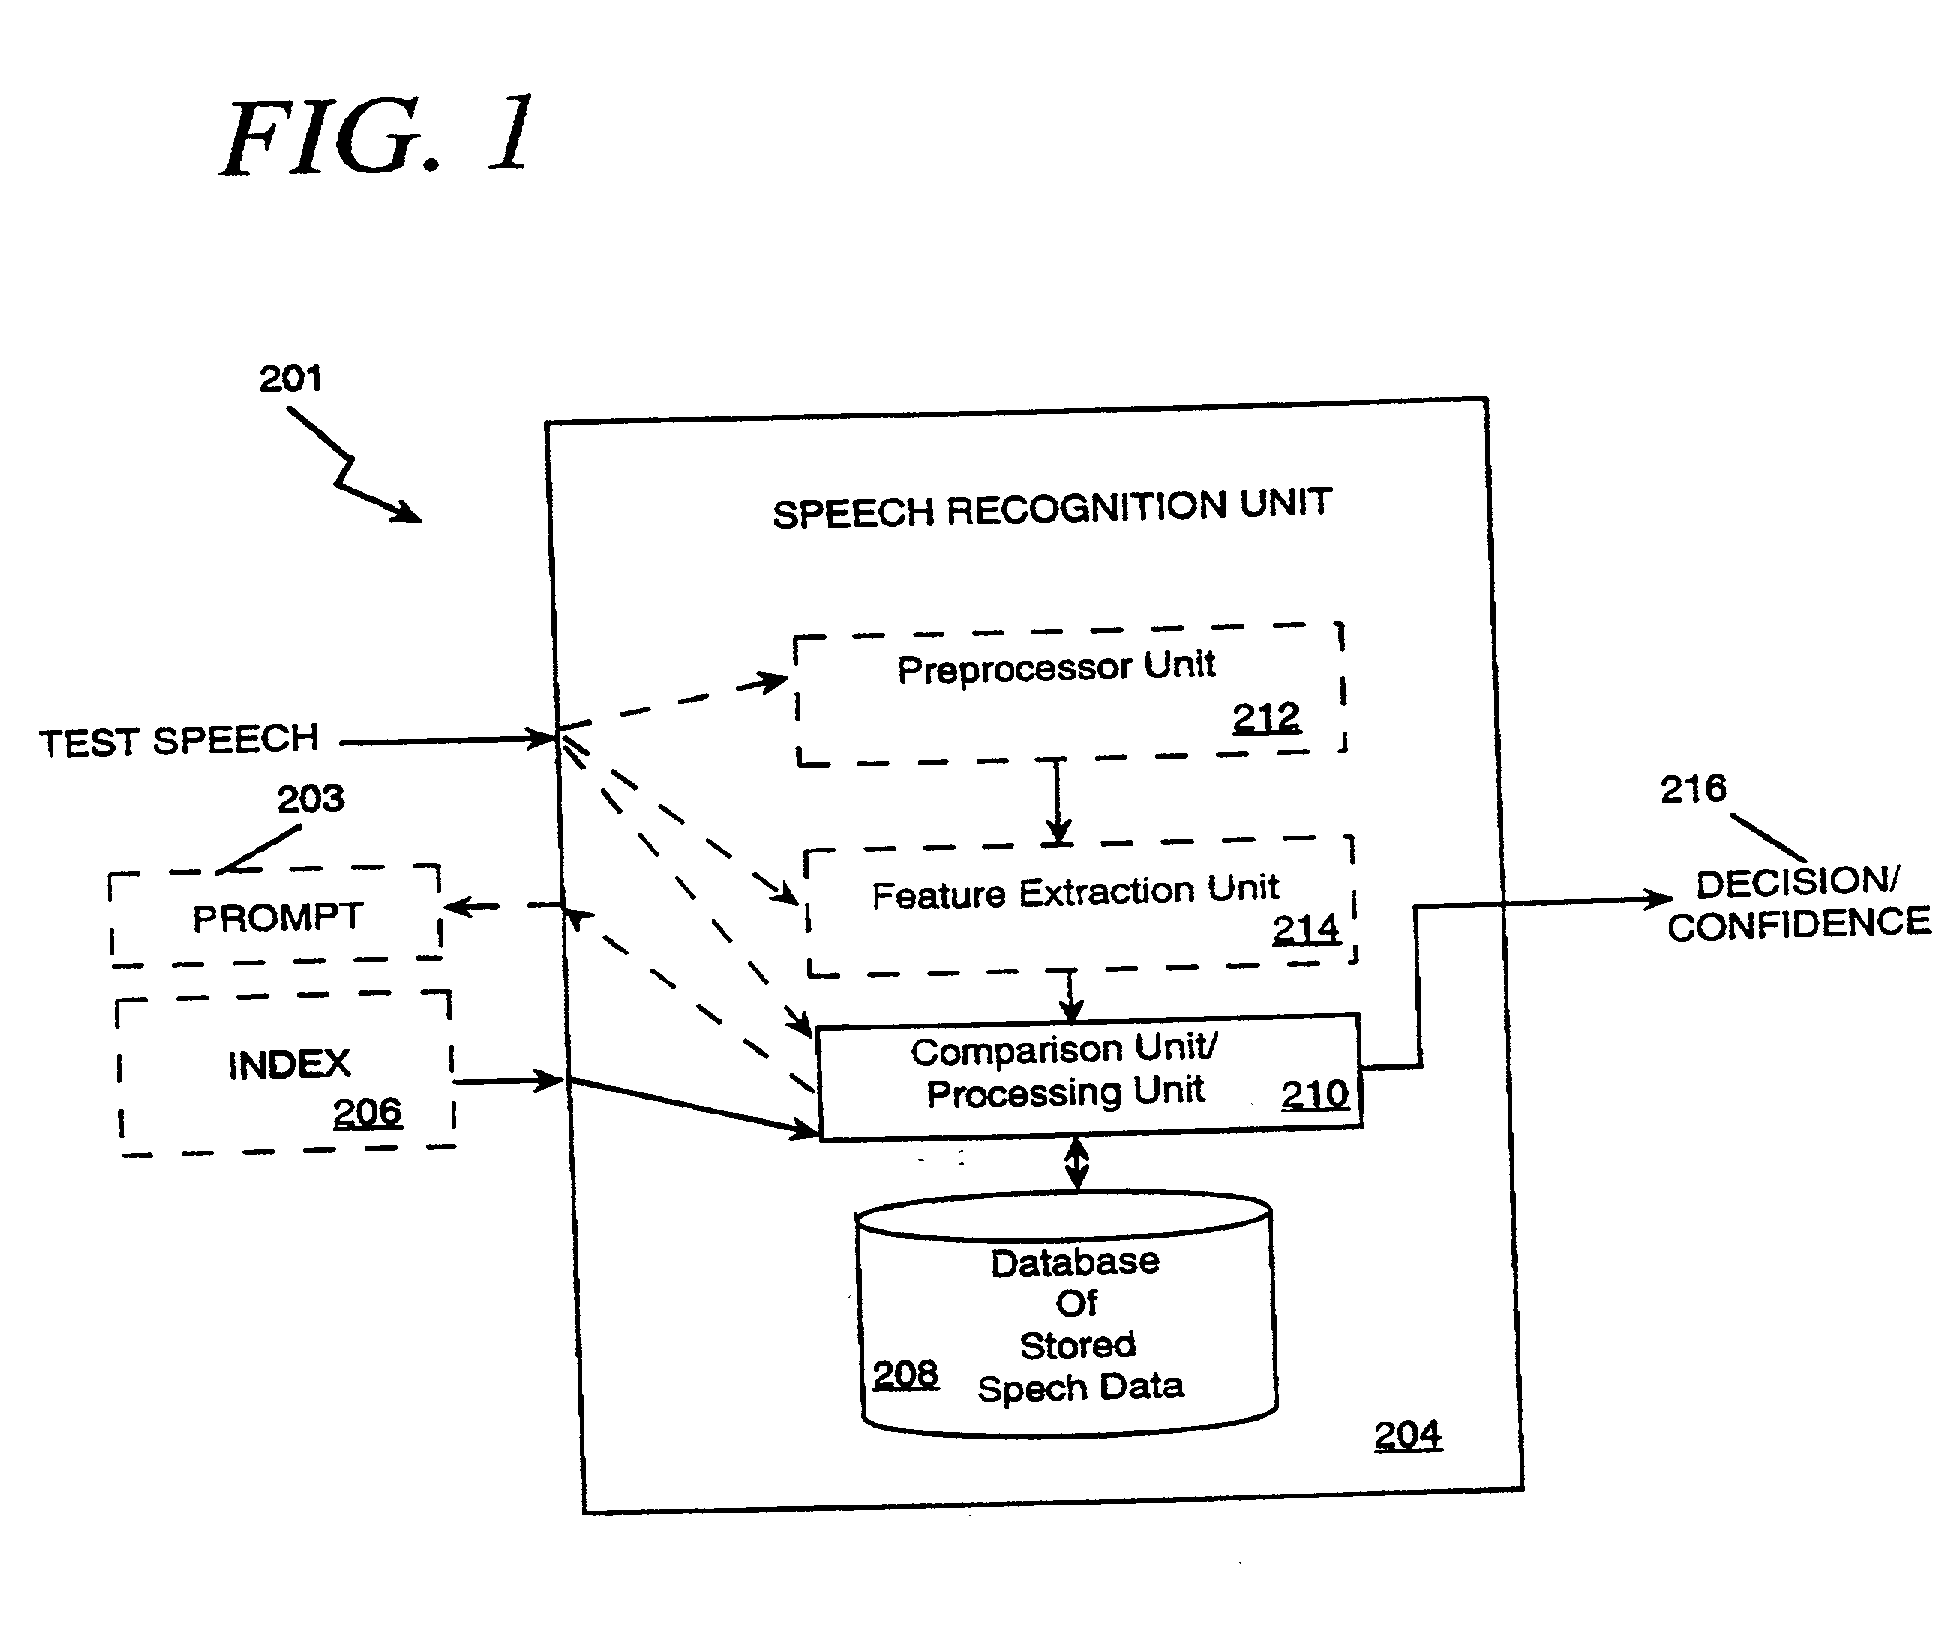 User validation for information system access and transaction processing